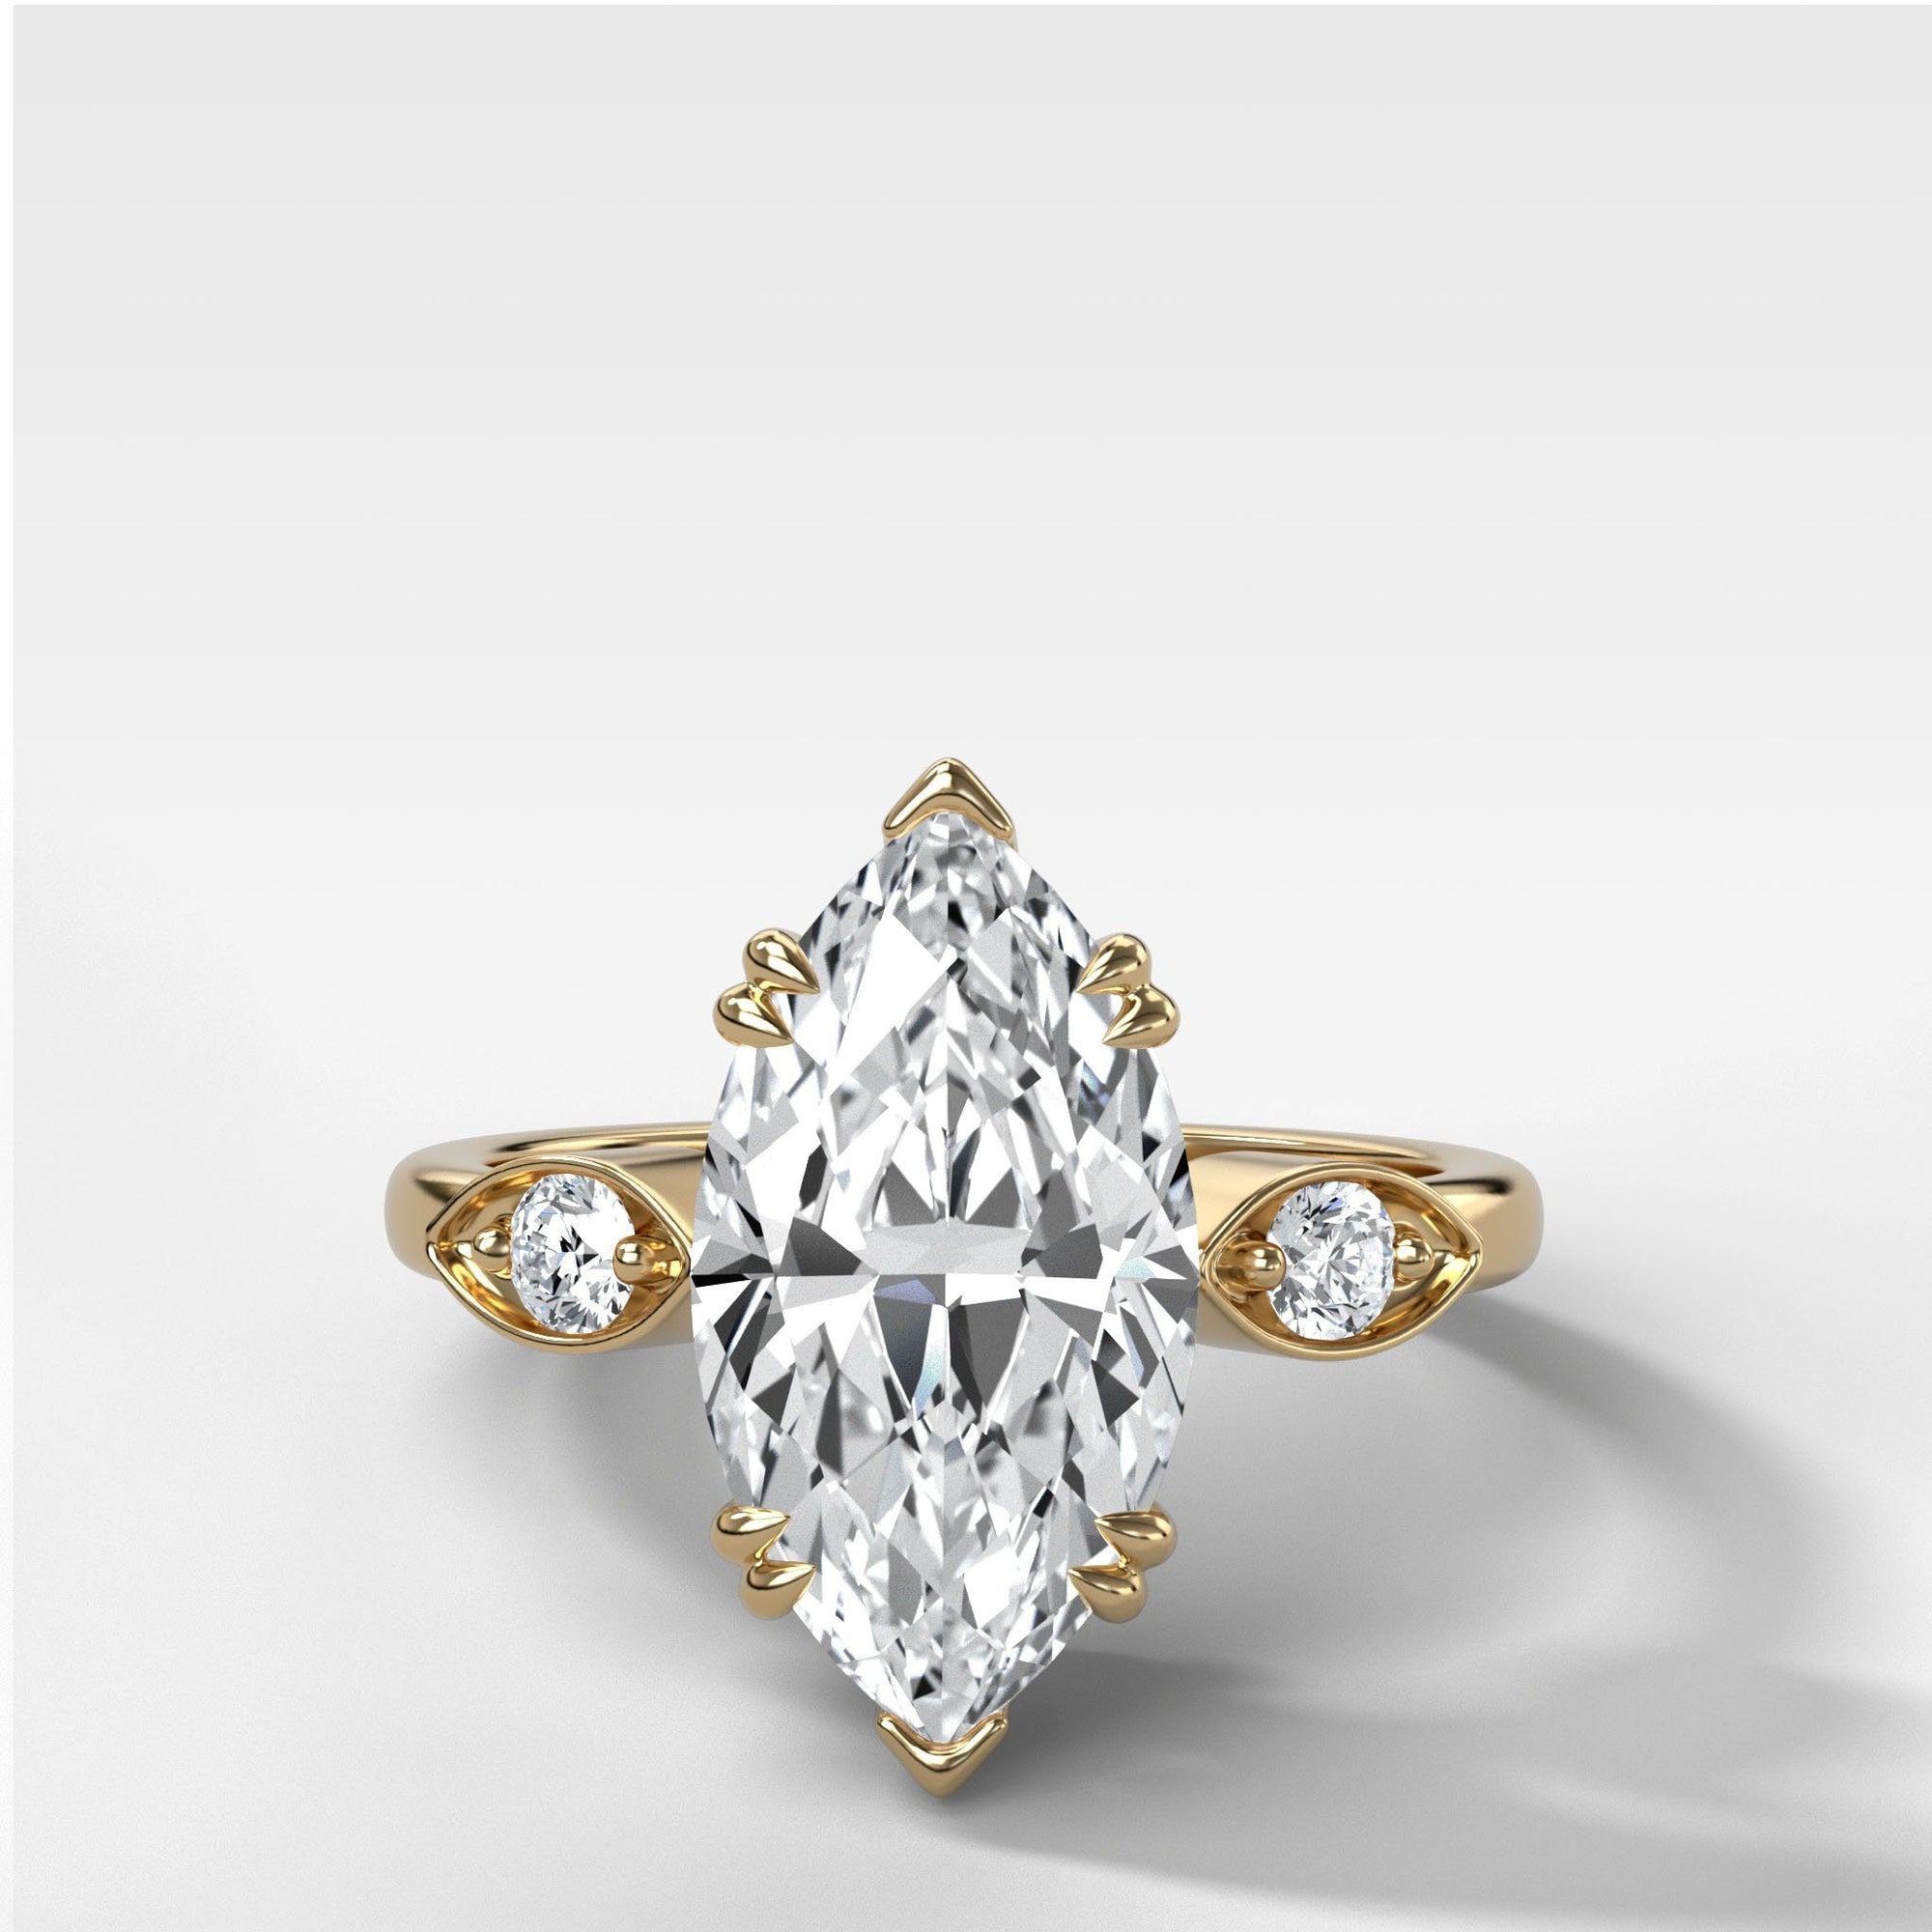 Vintage Ridge Shank Diamond Engagement Ring With Marquise Cut by Good Stone in Yellow Gold